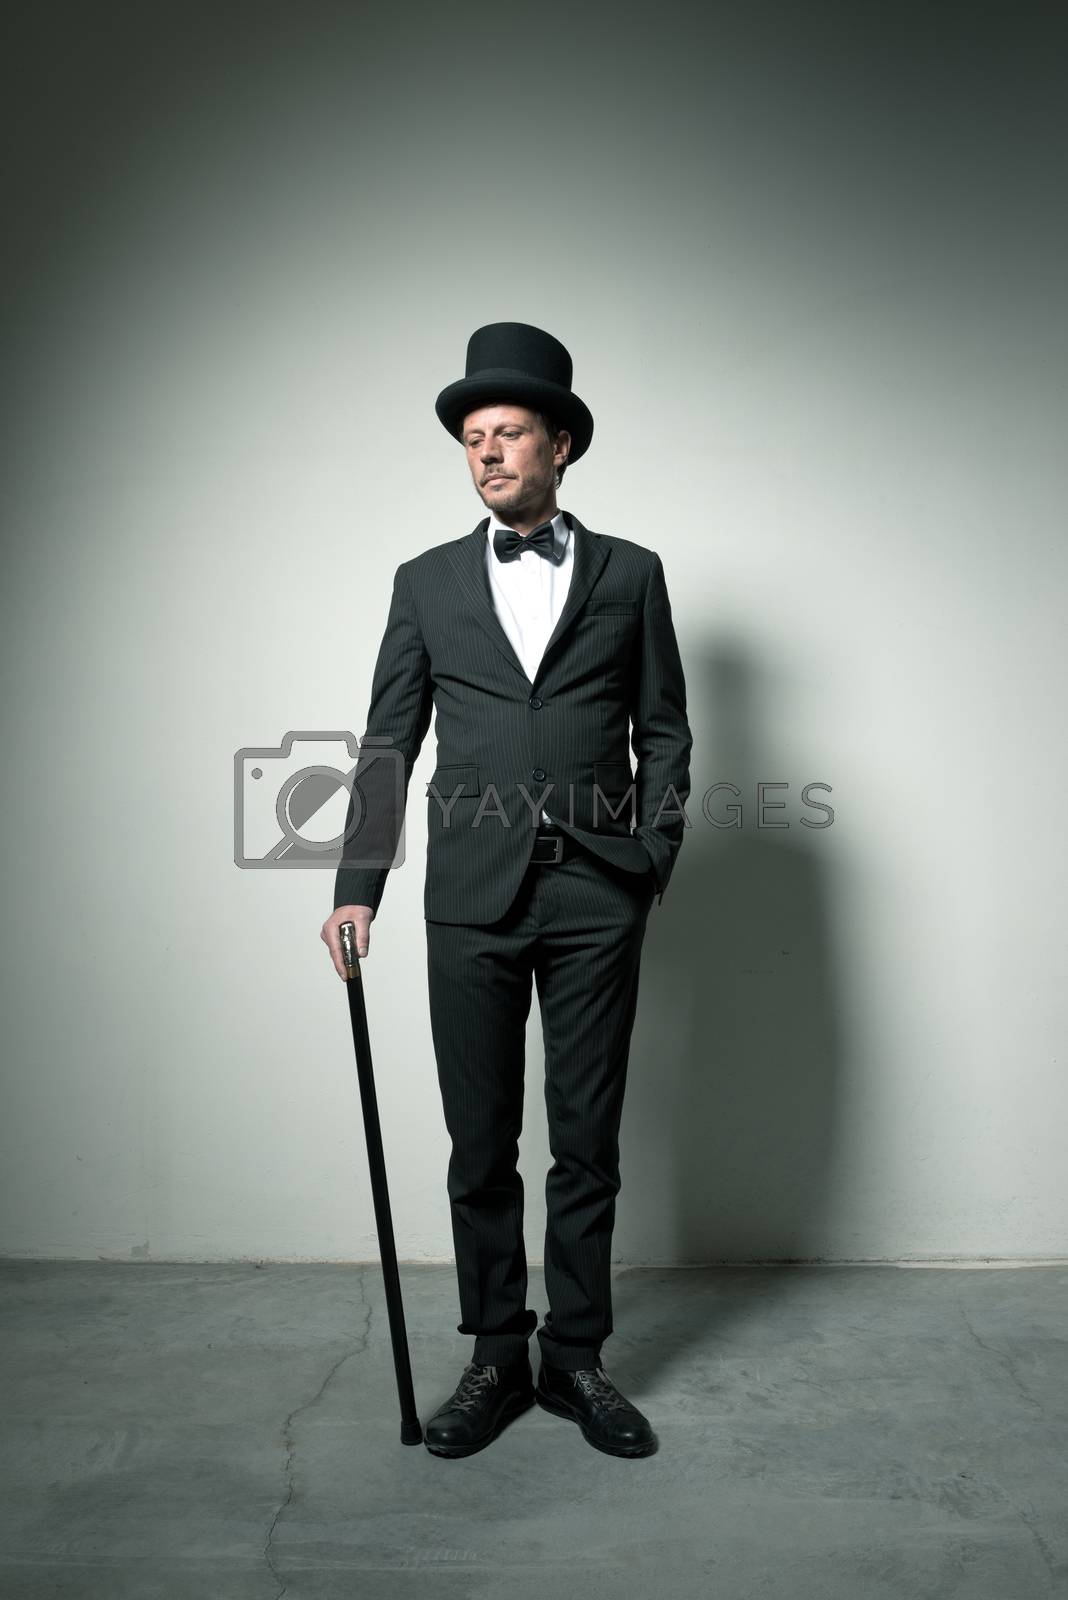 Royalty free image of Classy gentleman by stokkete